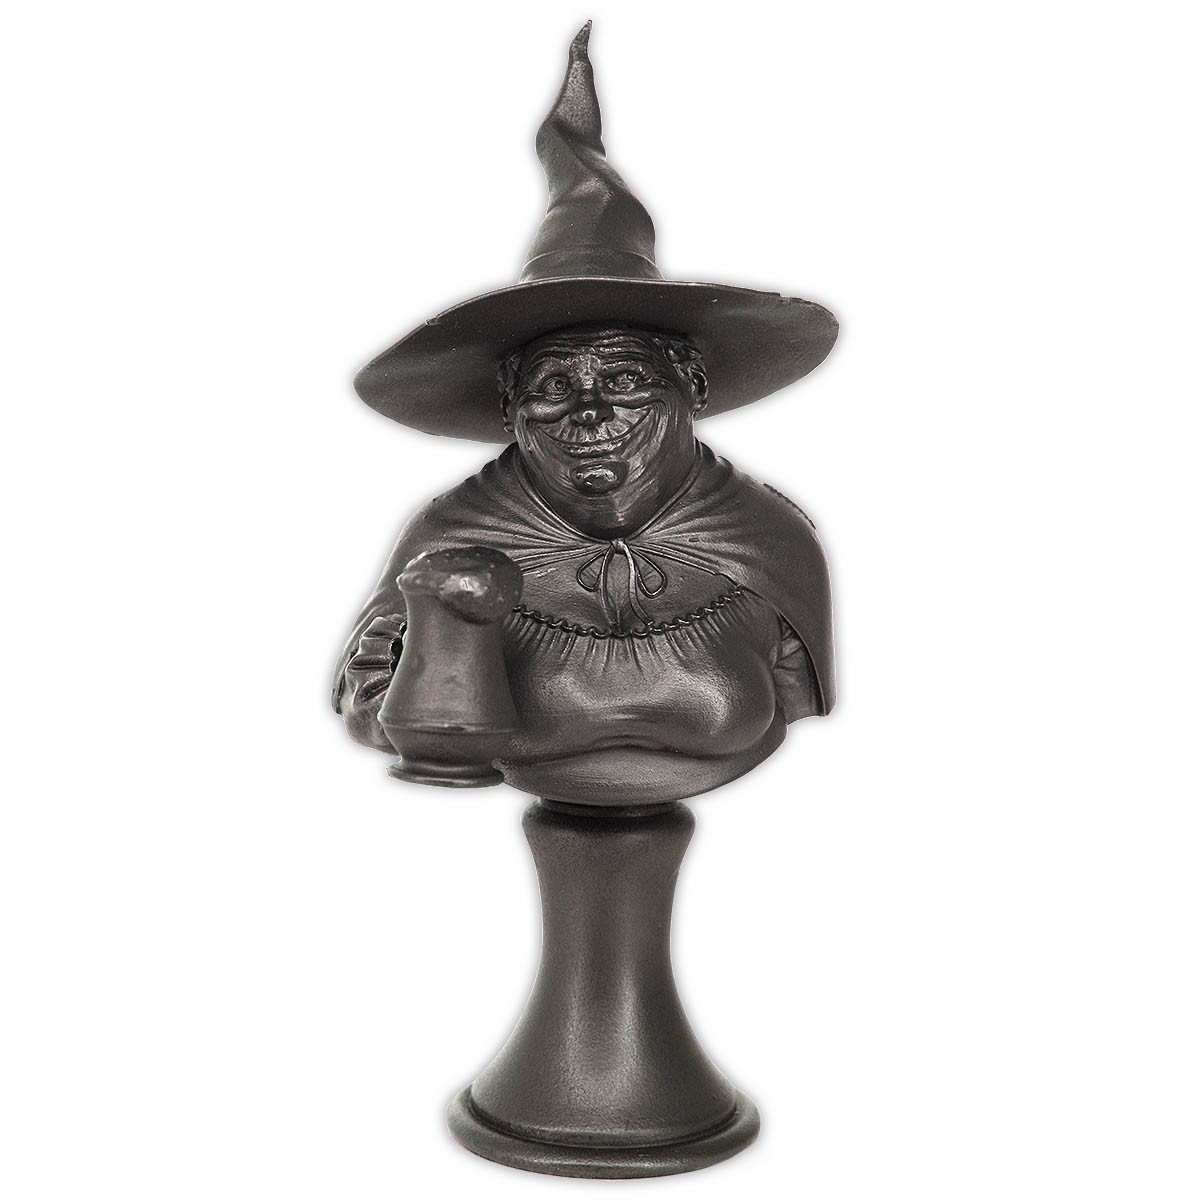 Nanny Ogg Bust - Unpainted